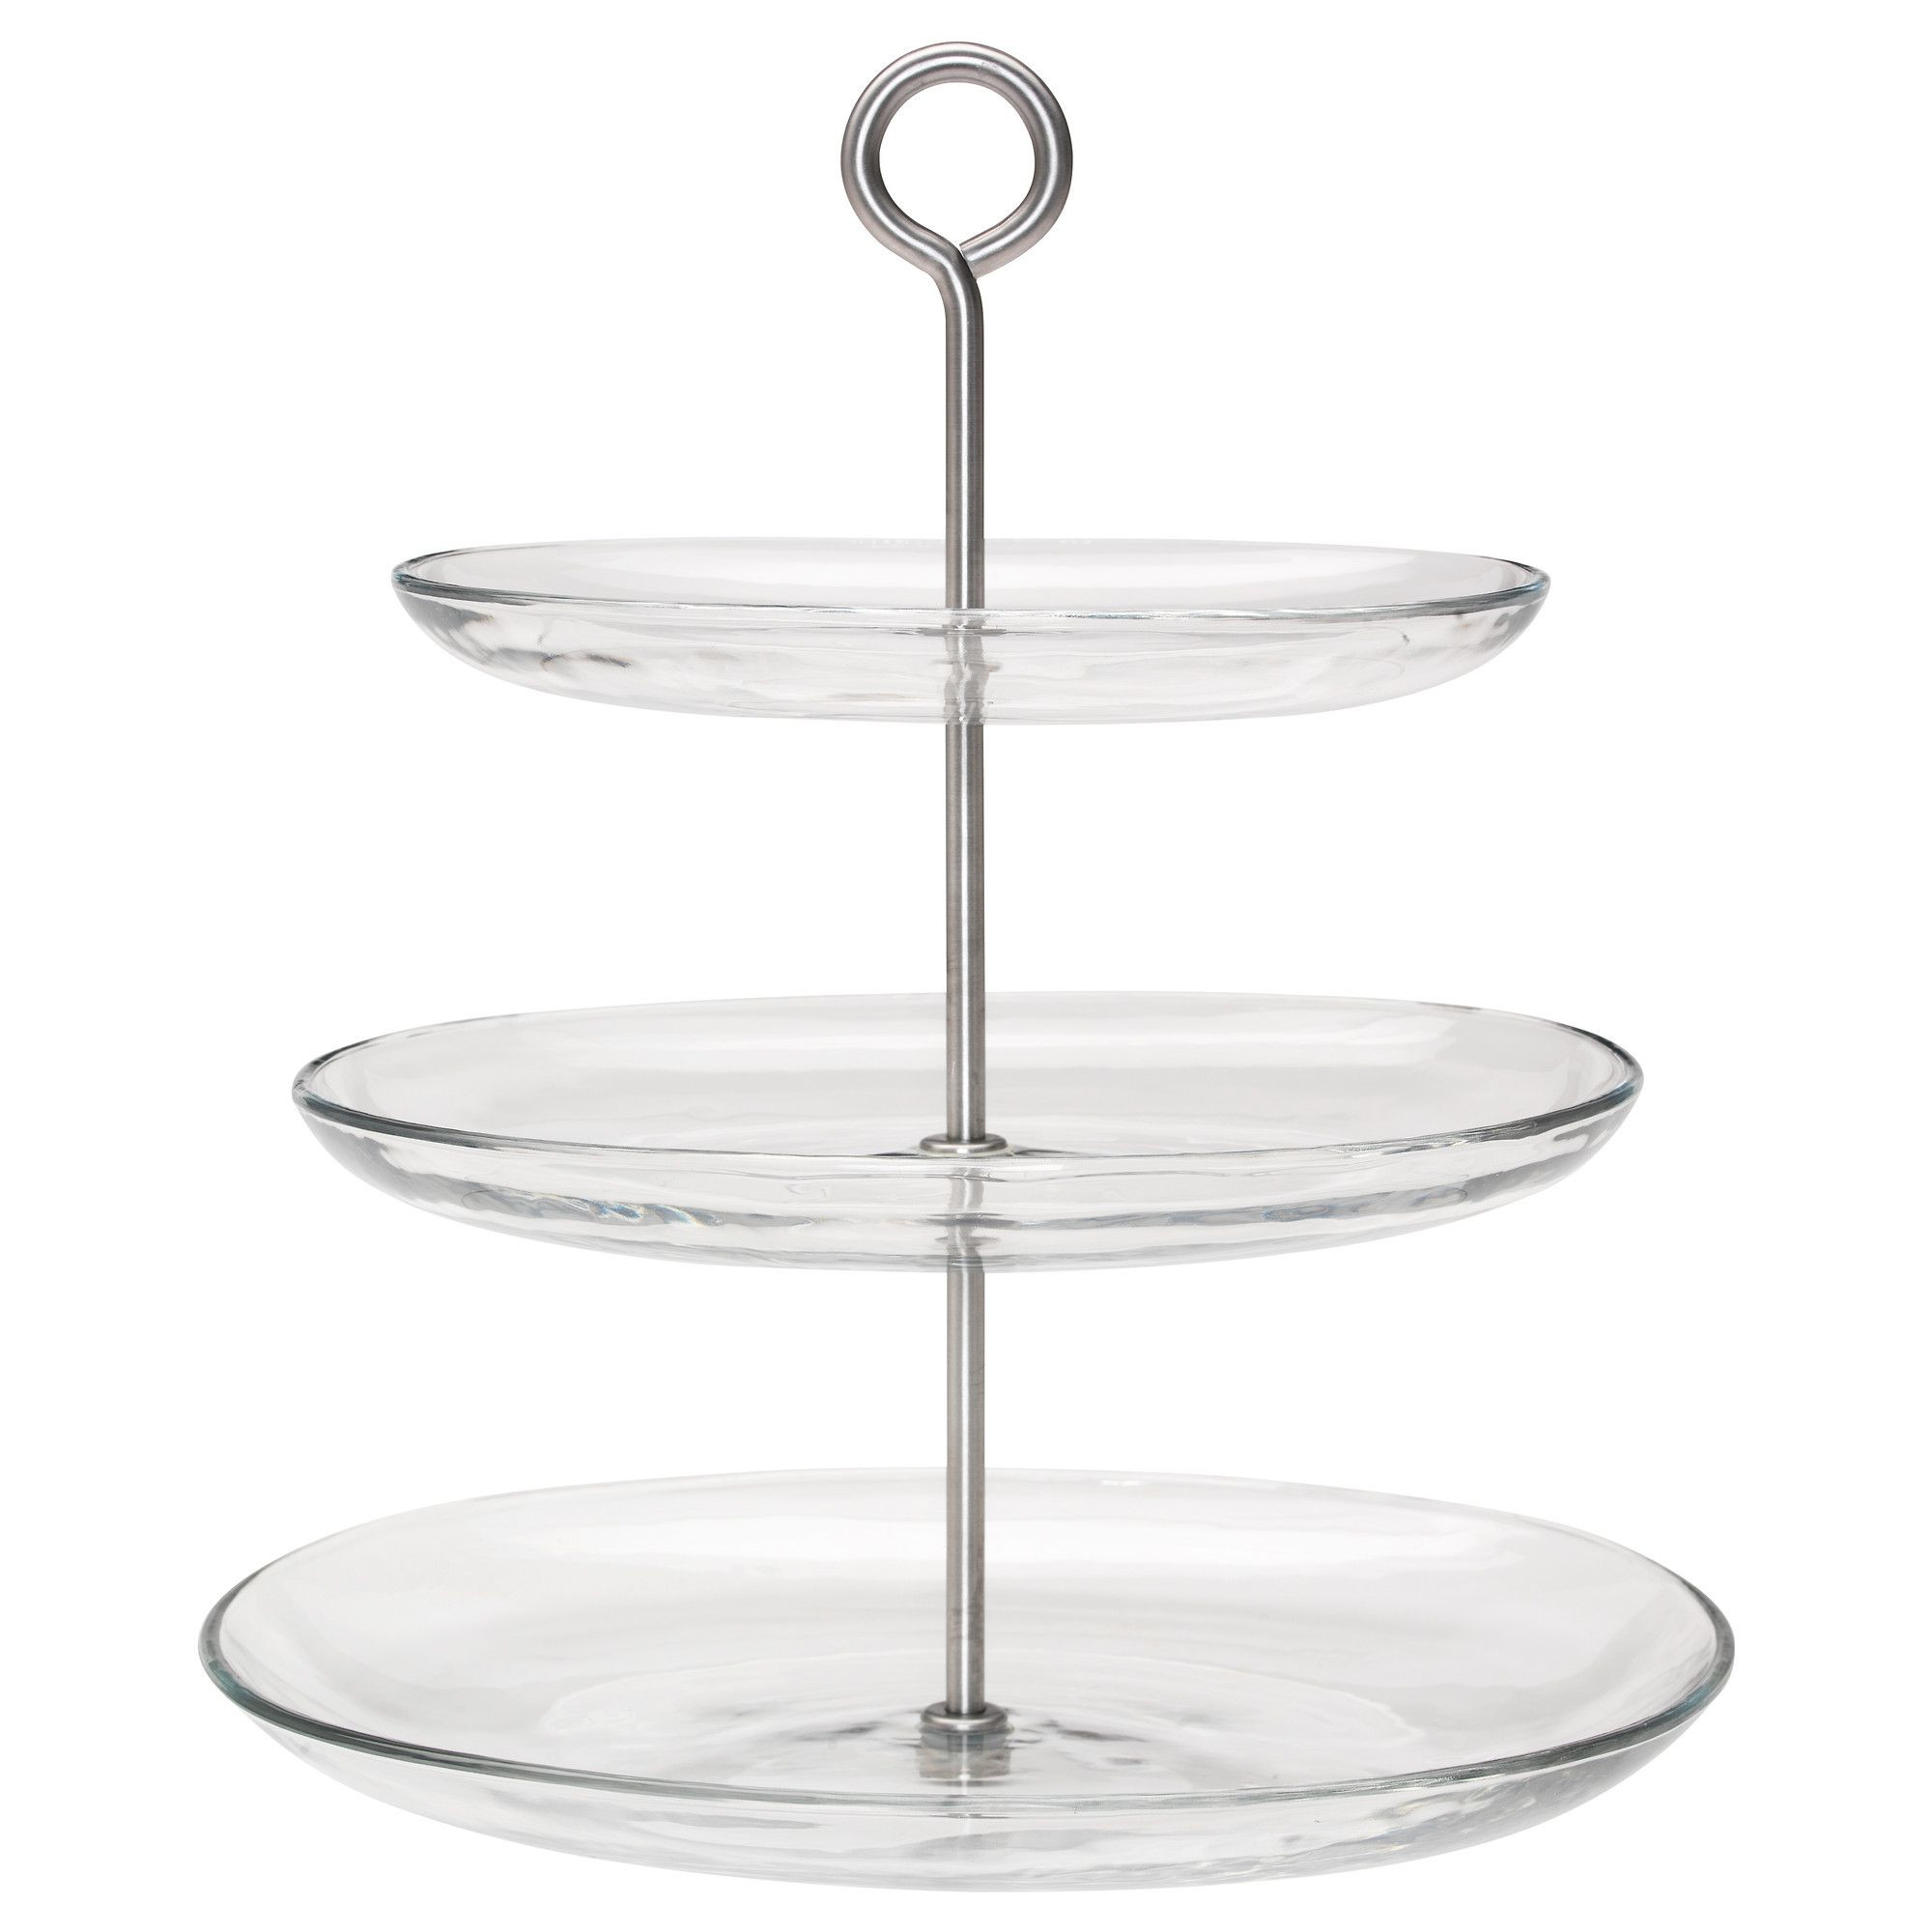 10 attractive Ikea Rectangular Glass Vase 2024 free download ikea rectangular glass vase of kvittera serving stand 3 tiers clear glass stainless steel wake inside ikea kvittera serving platter 3 tiers you can detach the plates and combine and vary the